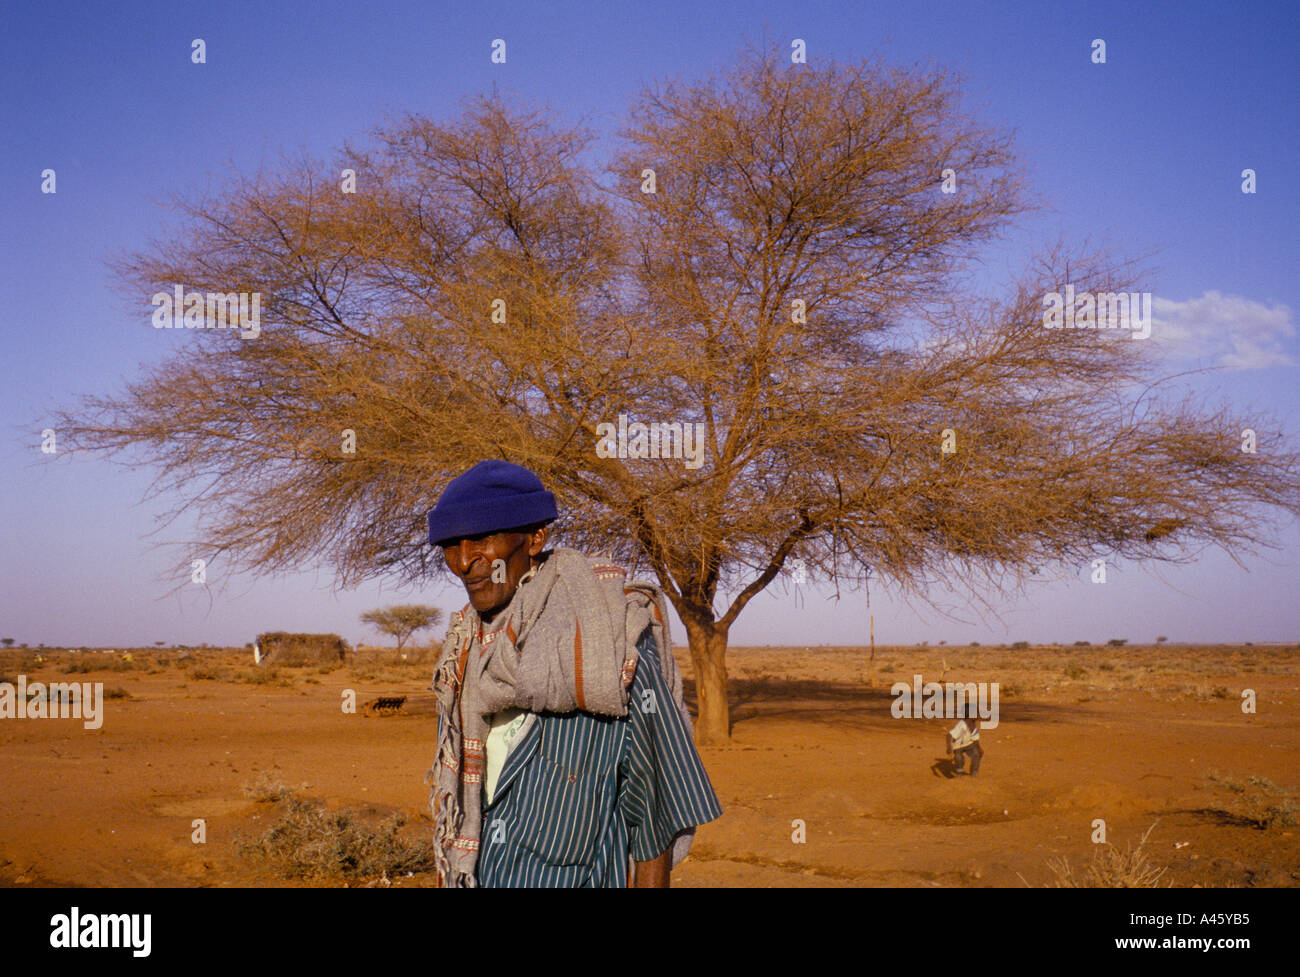 A farmer walks by a tree in the parched landscape of Eg village in the self declared independent country of Somaliland Stock Photo